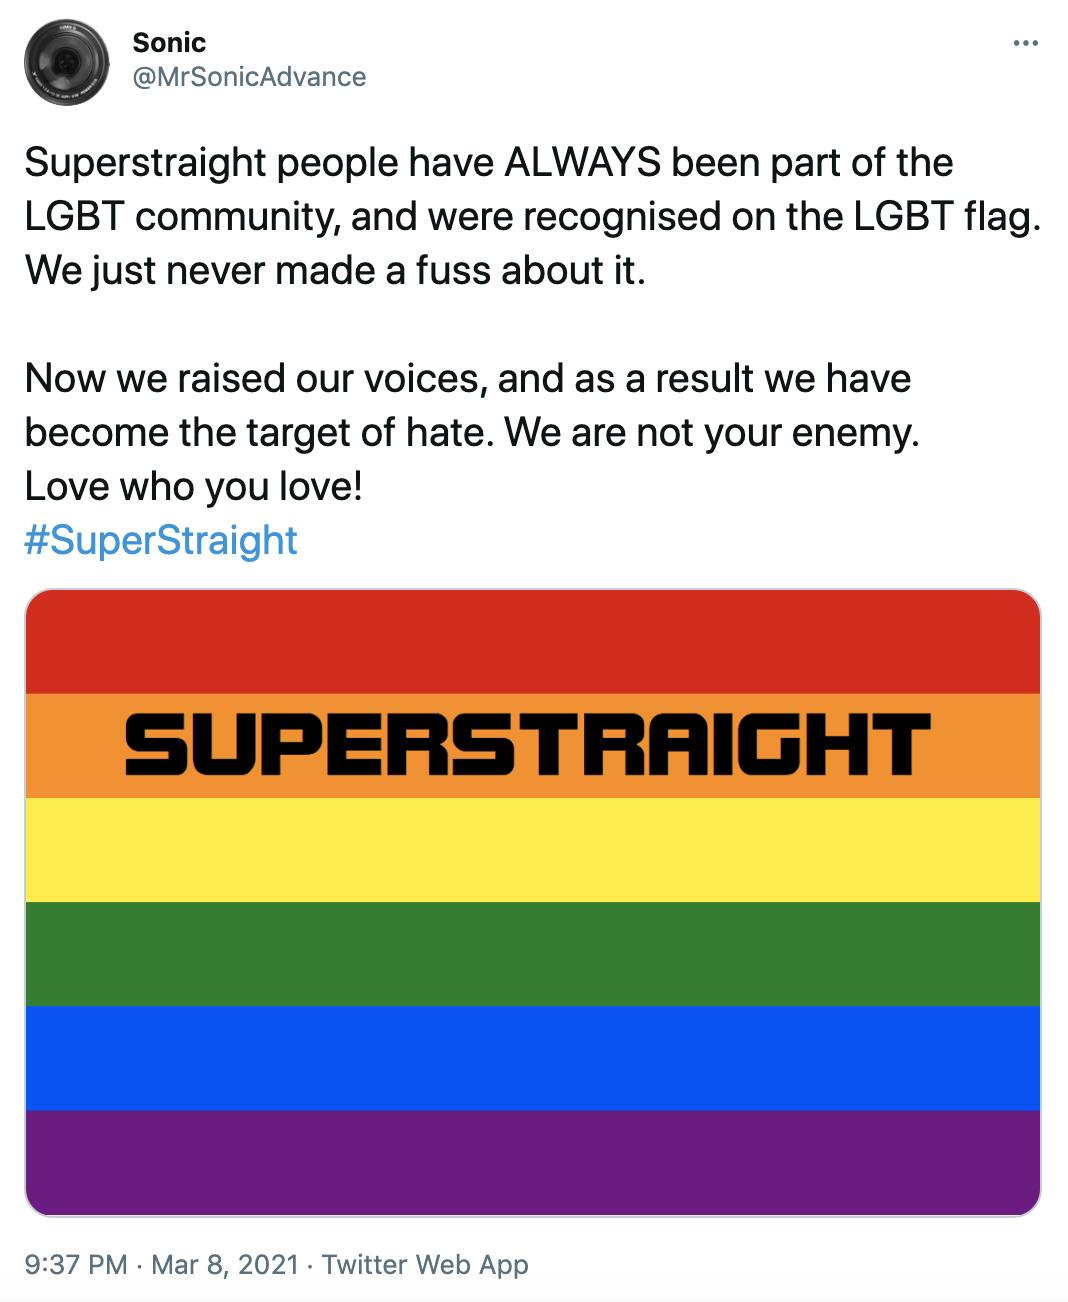 'Superstraight people have ALWAYS been part of the LGBT community, and were recognised on the LGBT flag. We just never made a fuss about it. Now we raised our voices, and as a result we have become the target of hate. We are not your enemy. Love who you love! #SuperStraight' picture of a pride flag with super straight written across the orange line in black text